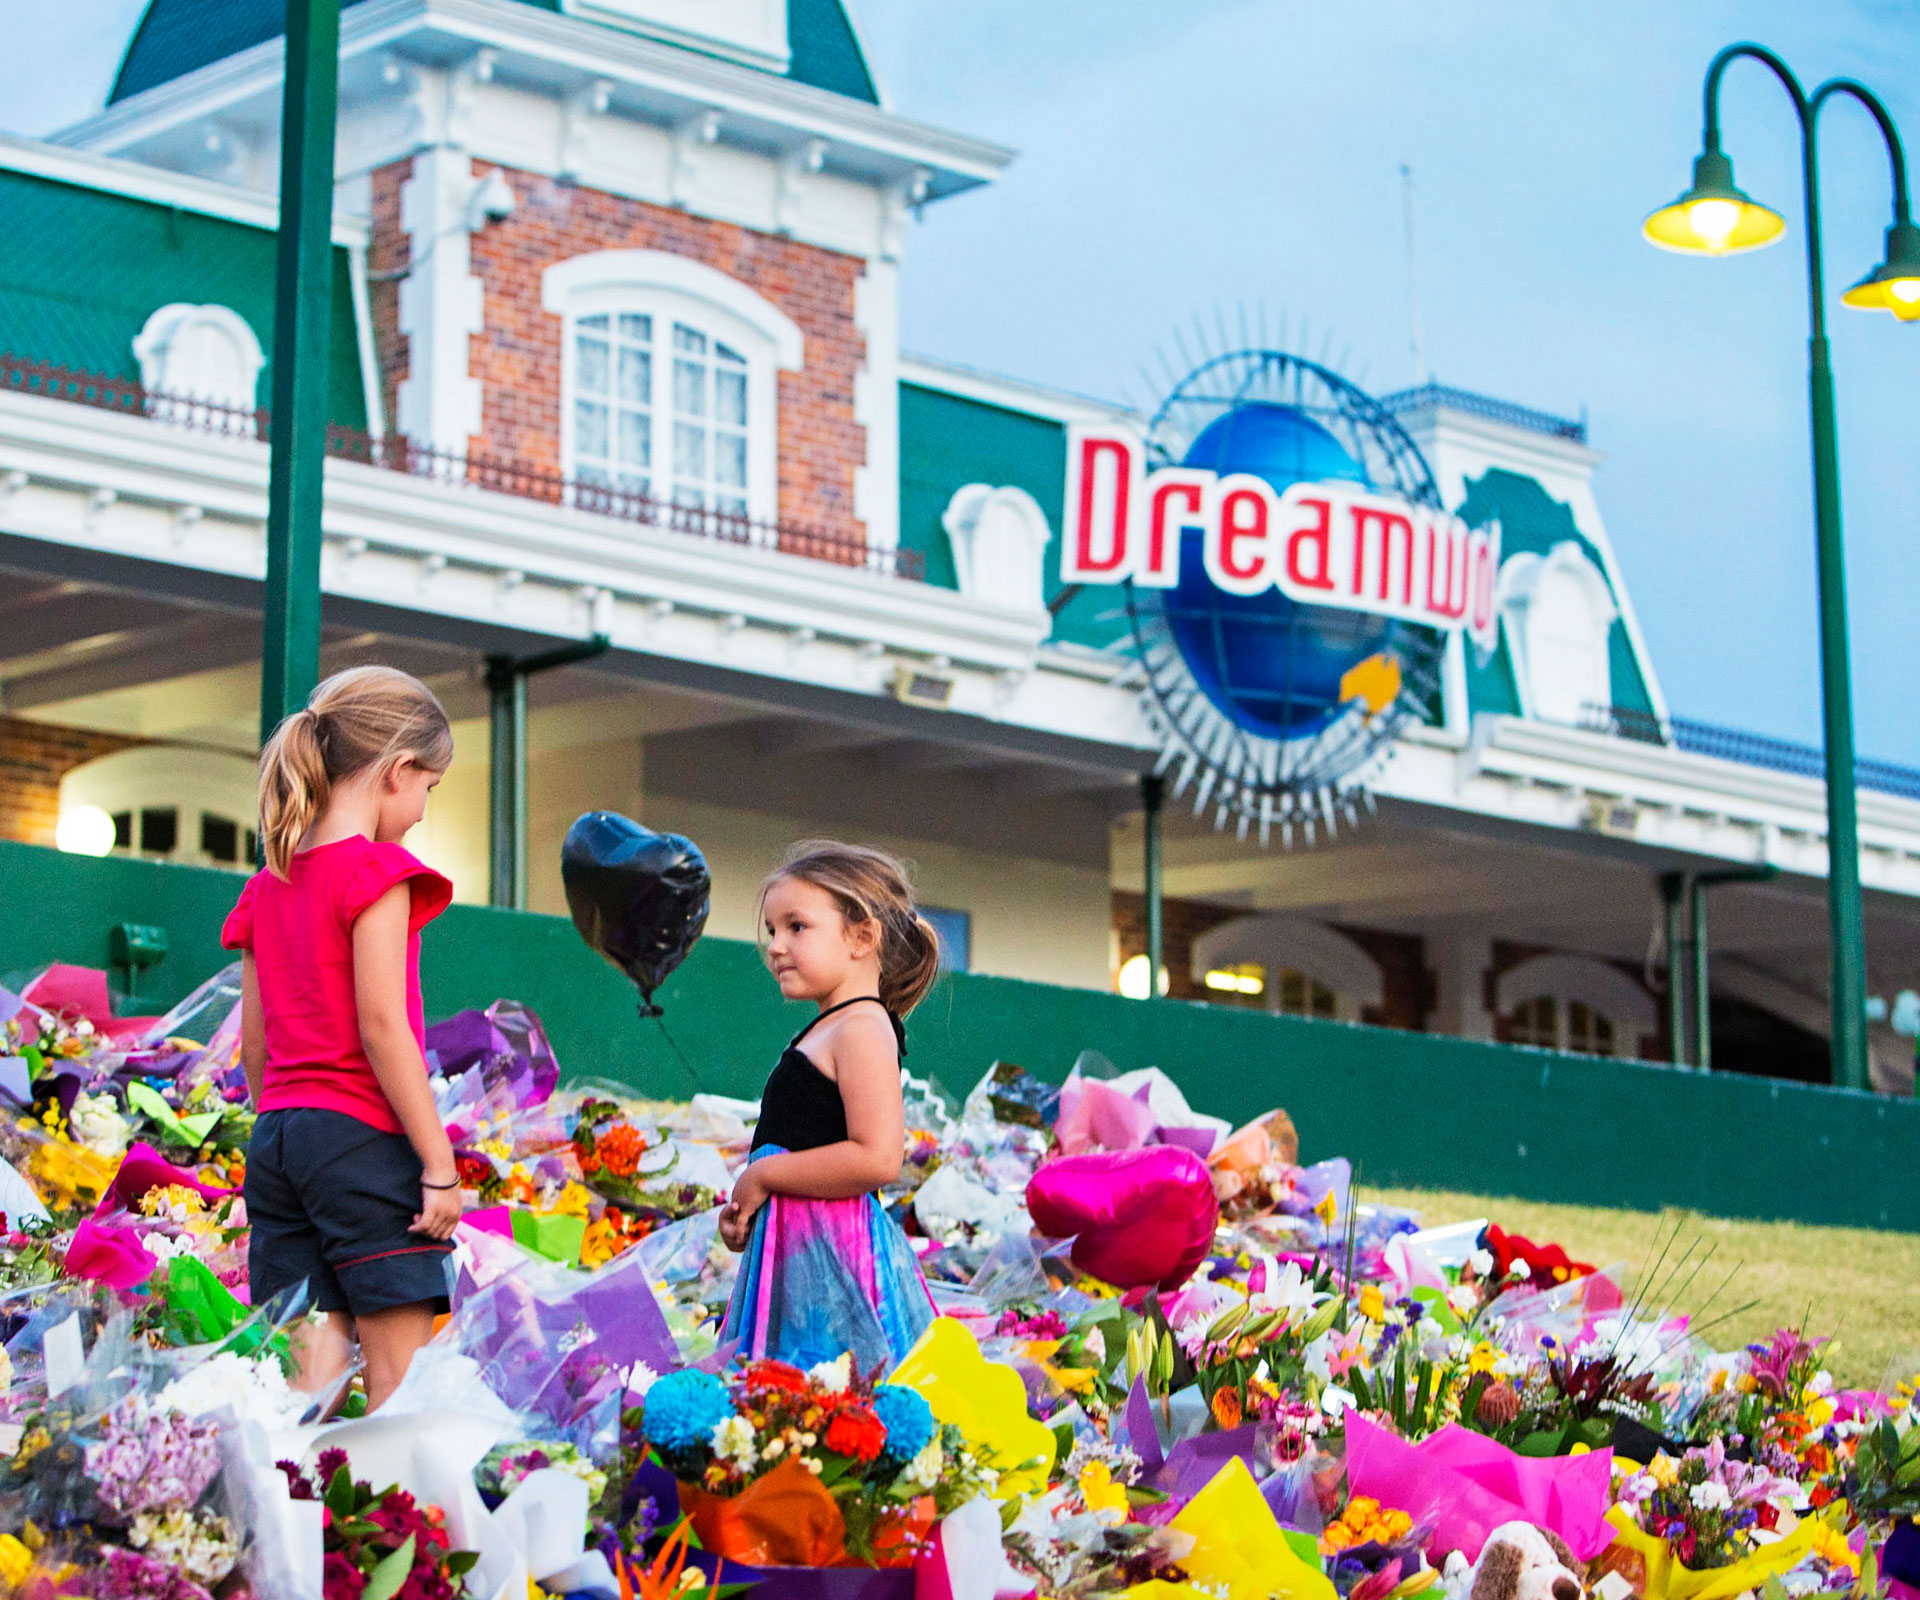 Floral tributes covered the entrance to Dreamworld in tribute to the  four people  killed on the Thunder Rapids ride